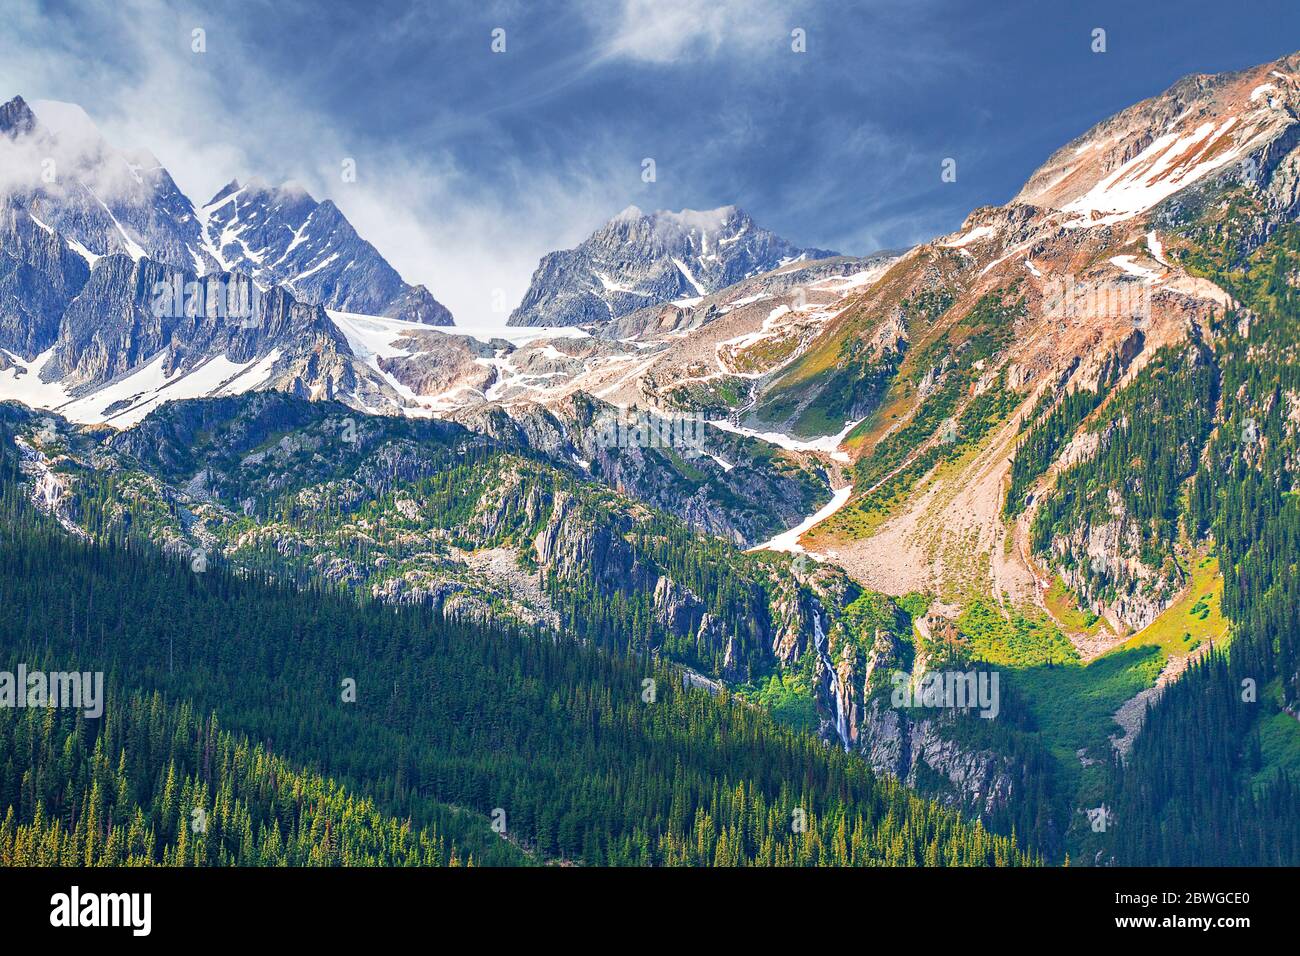 View over the Canadian Rockies in Alberta, Canada Stock Photo